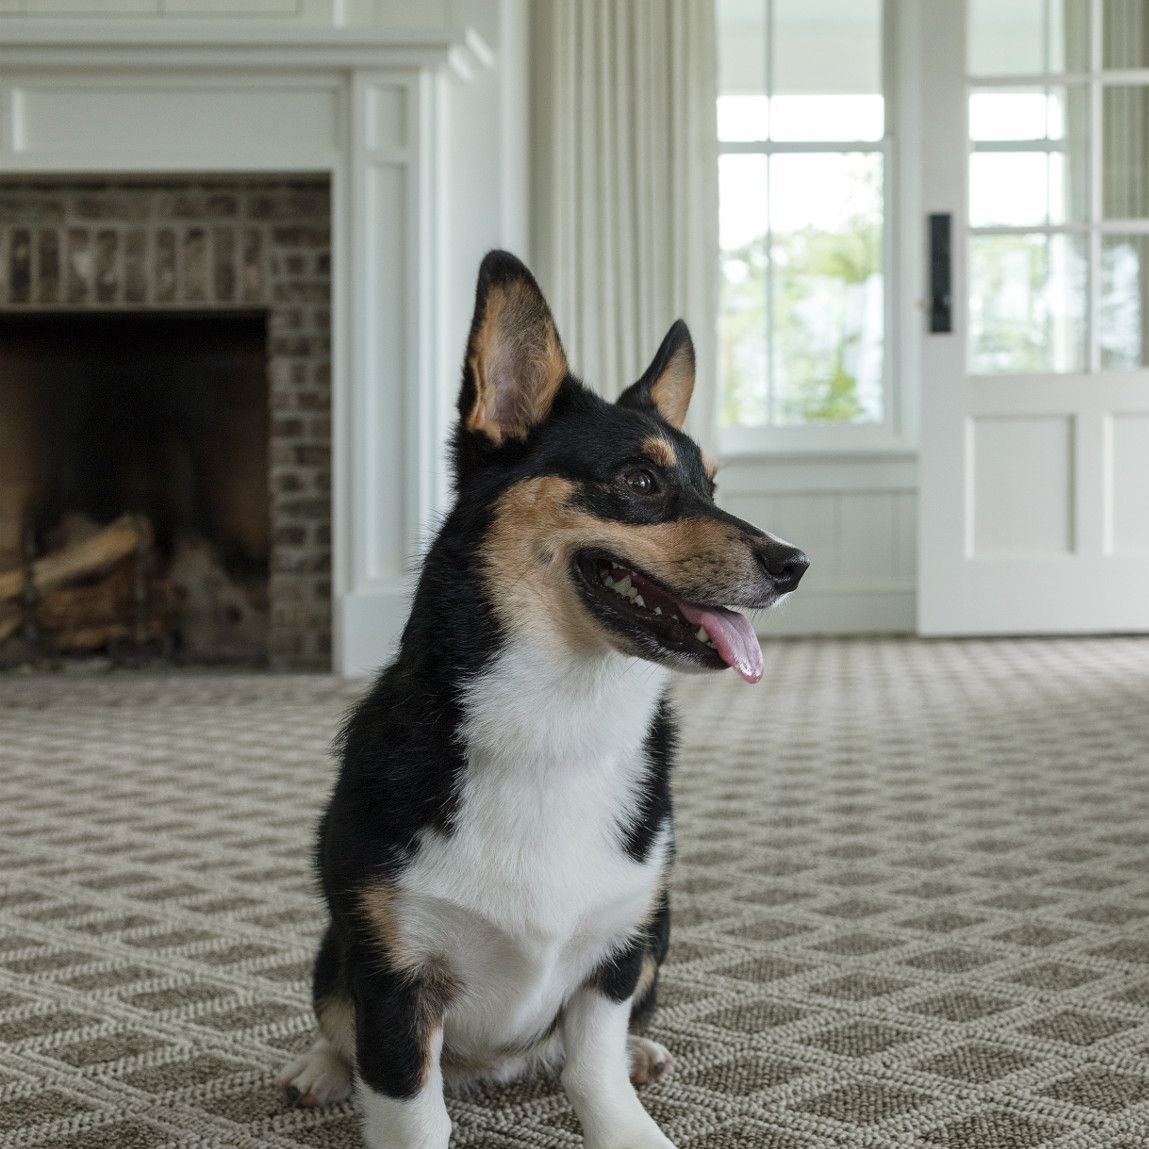 Pet solutions flooring article provided by Floors By Sterling Hight